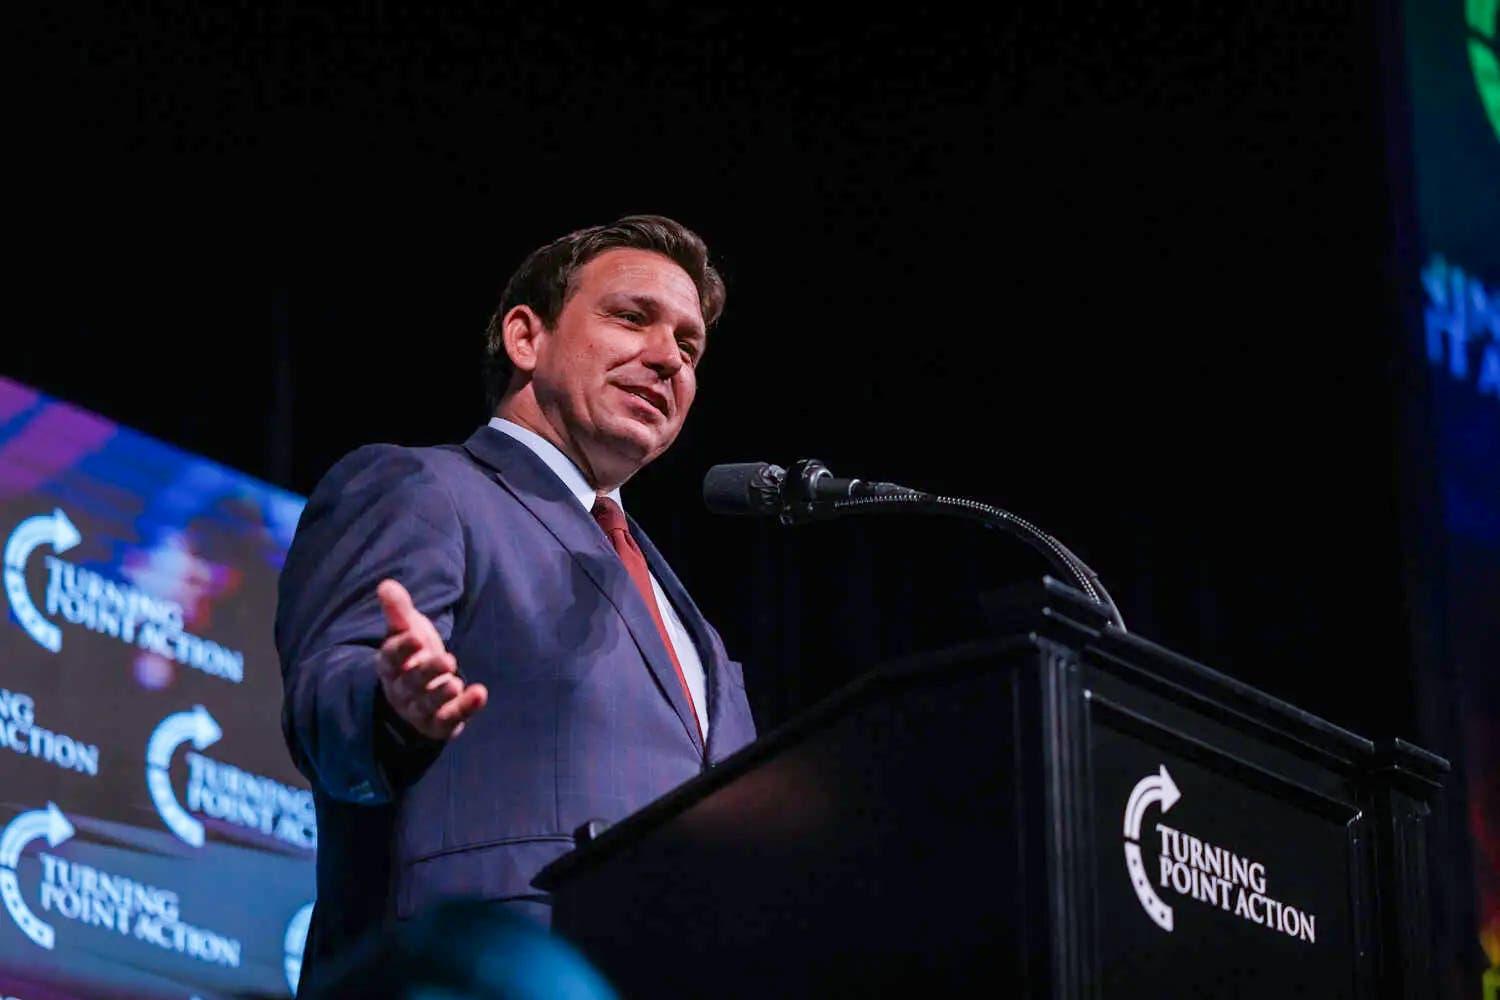 Gov. Ron DeSantis of Florida gesturing with his arms as he speaks at a lectern.